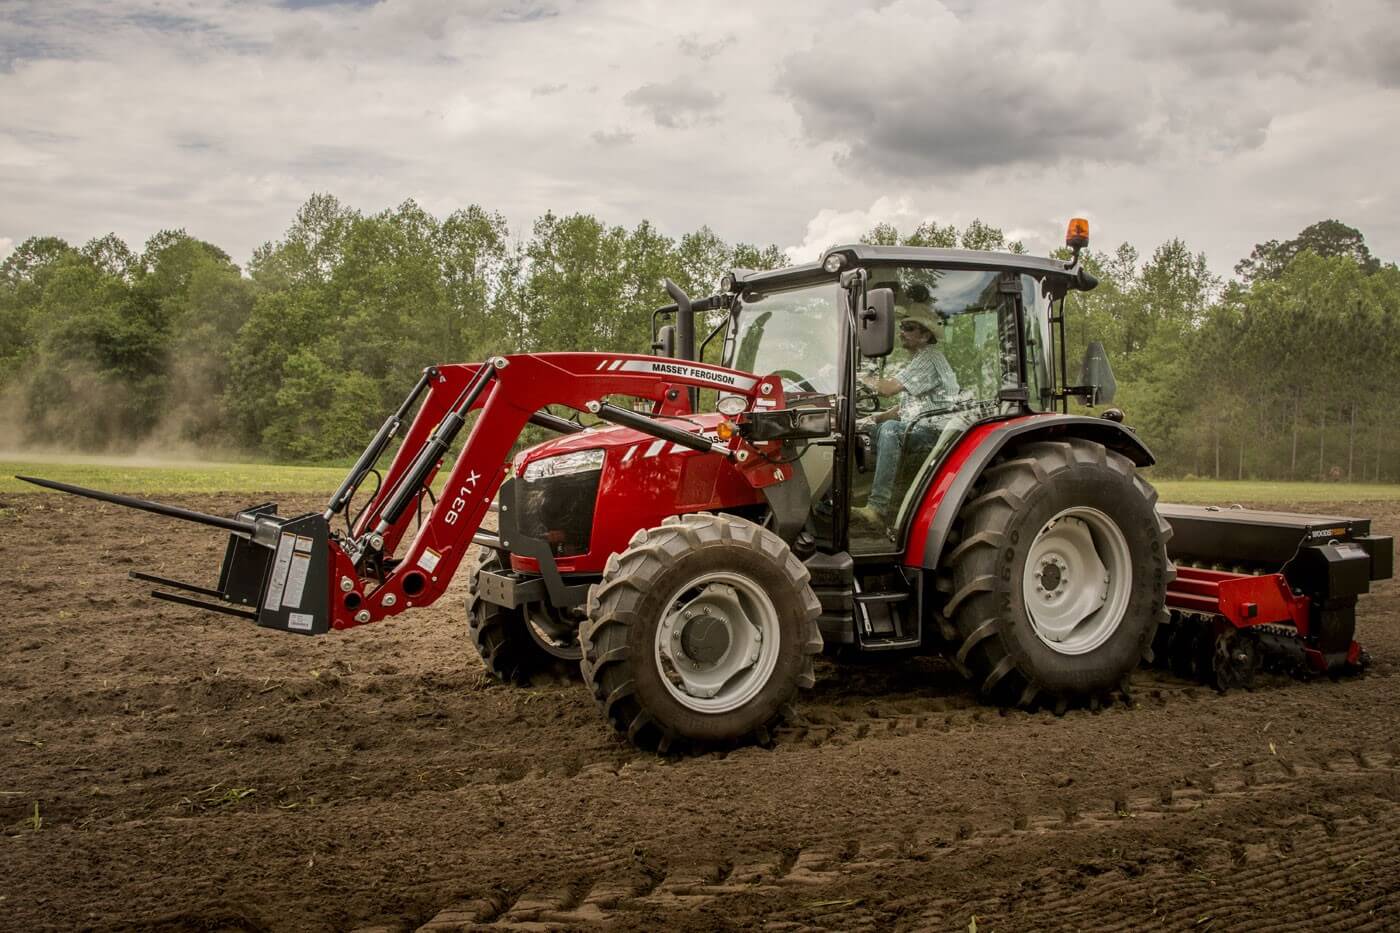 A DURABLE, BETTER-WORKING TRACTOR